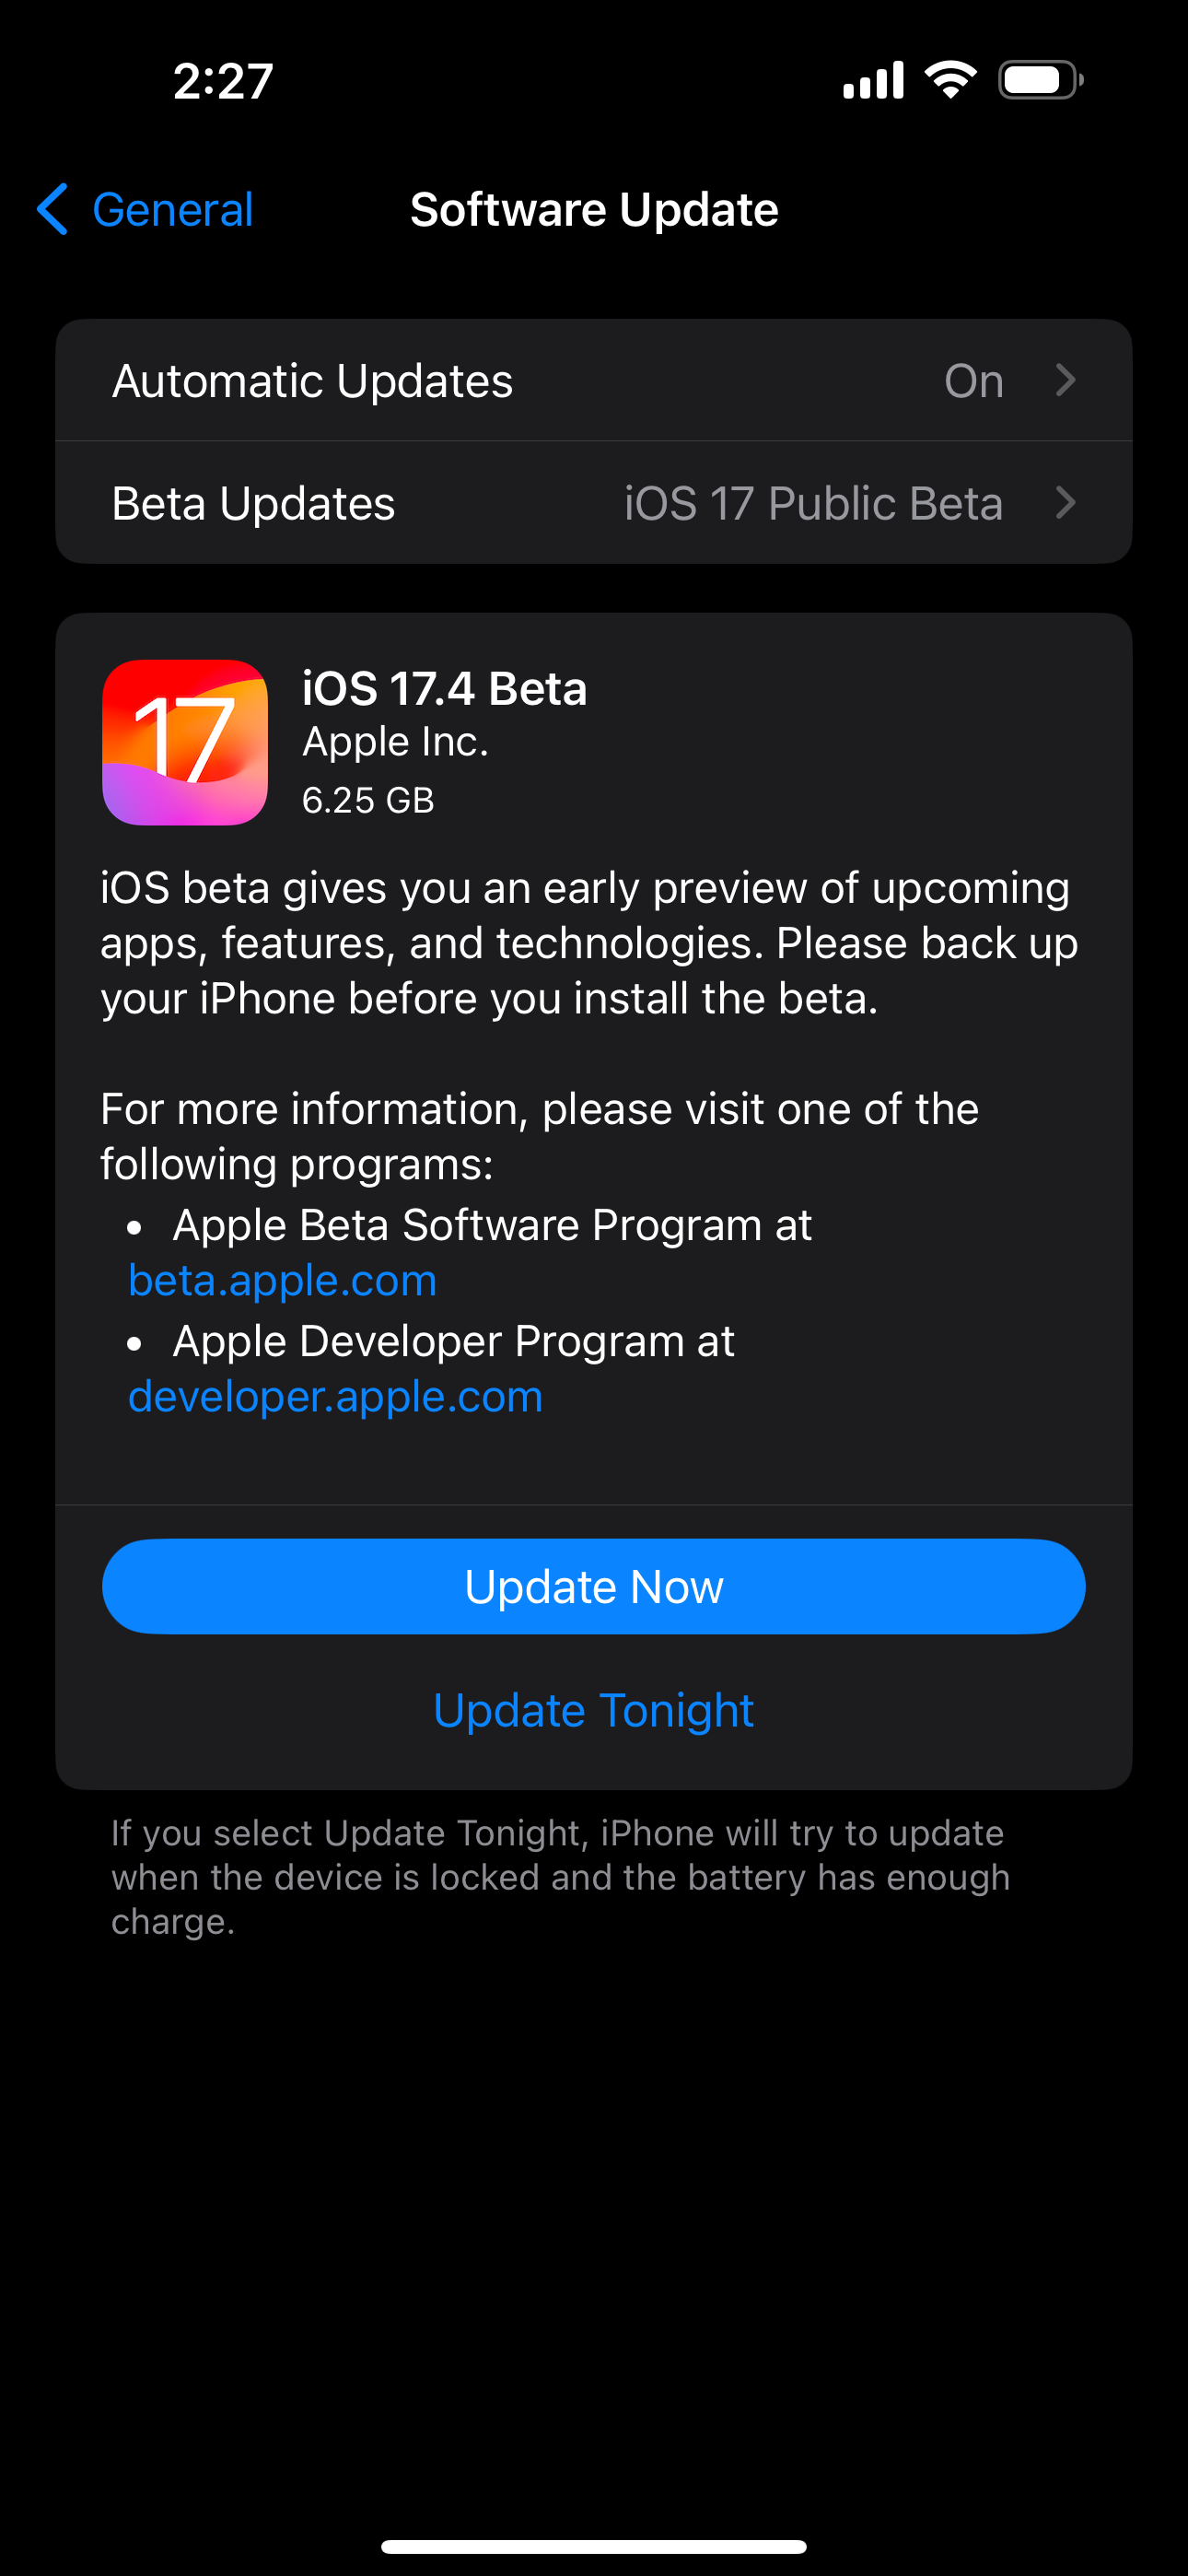 iOS Software Update menu showing iOS 17.4 update available